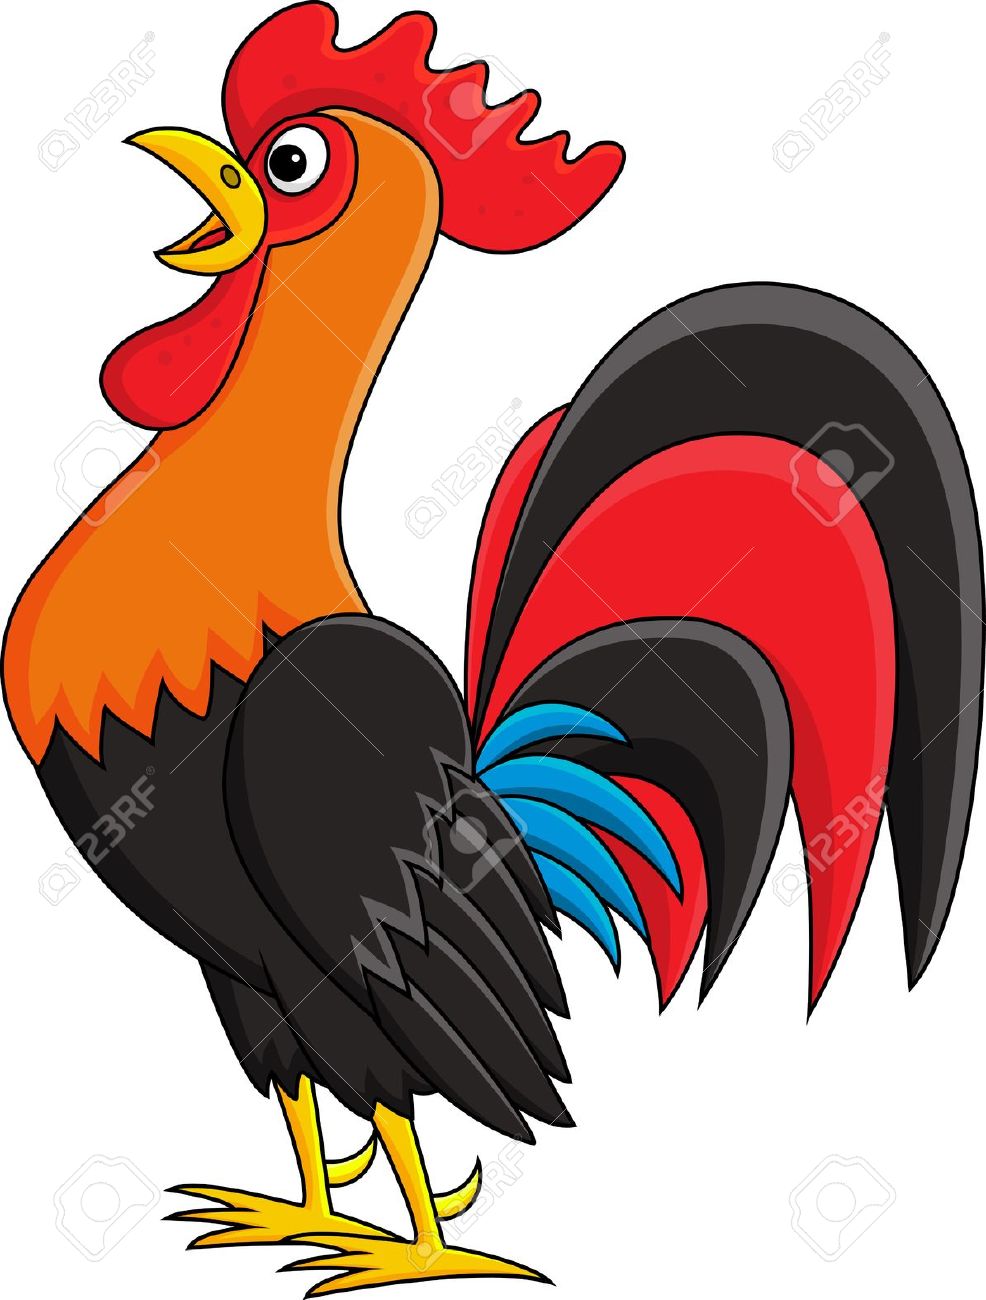 Rooster clip art cartoon free clipart images 2 love